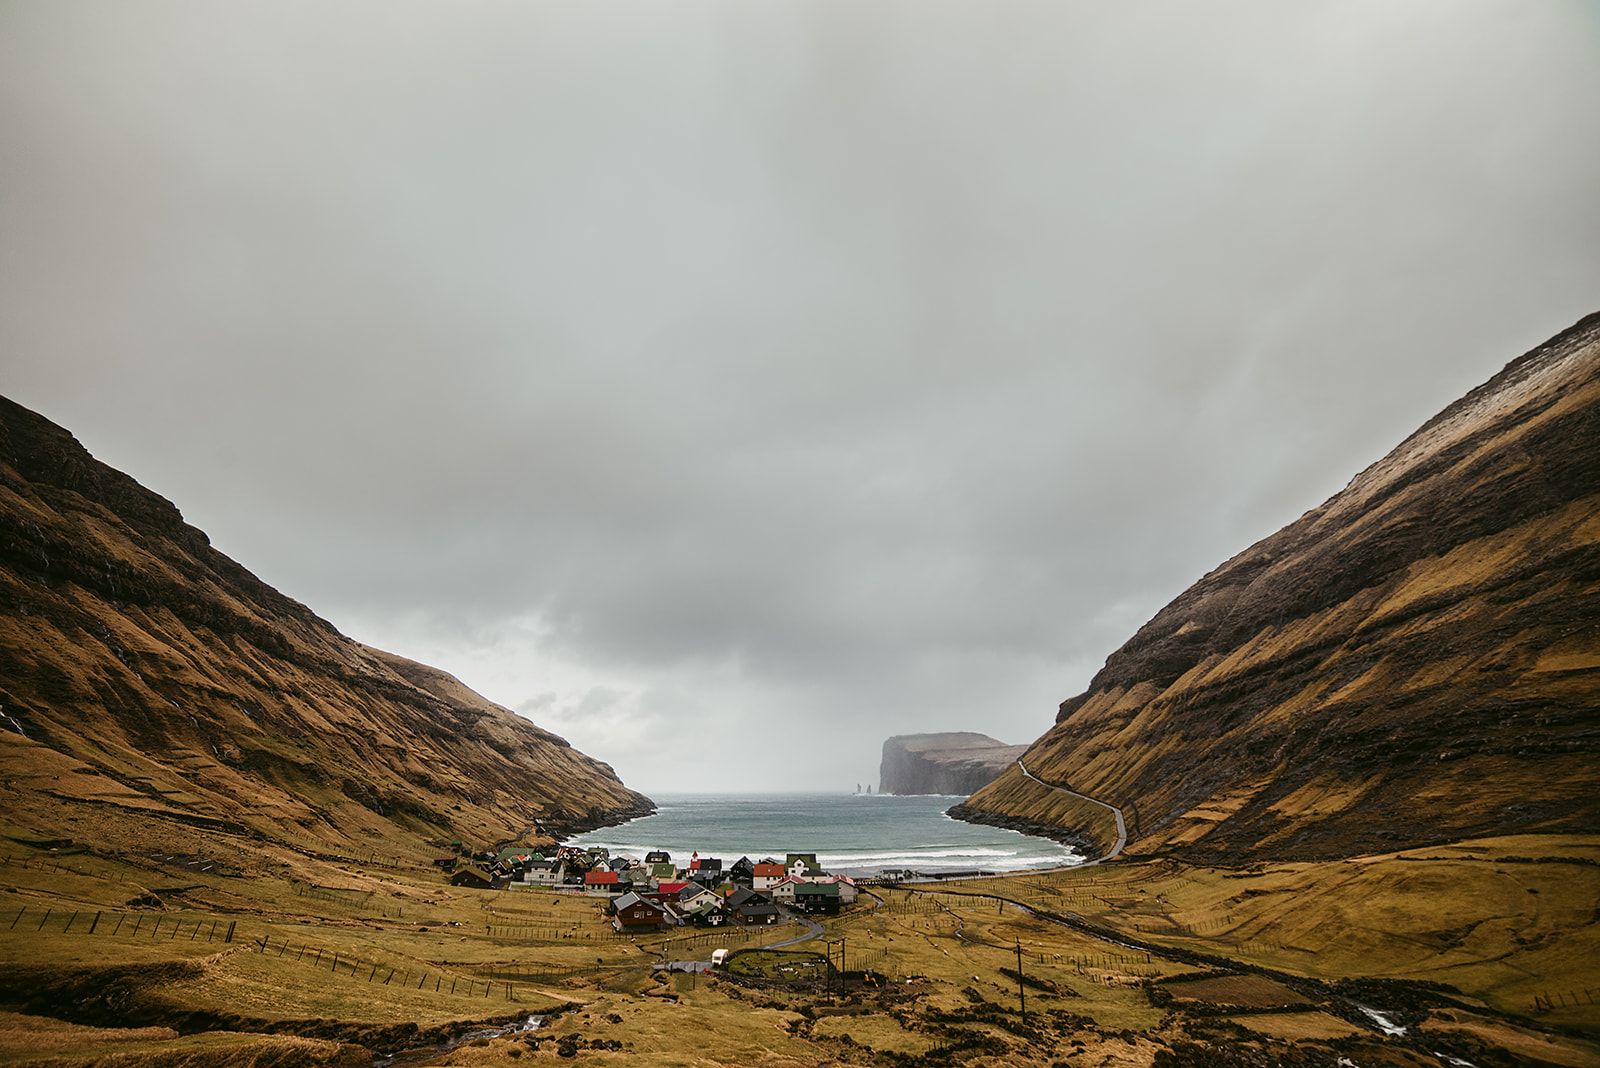 Small settlement at the end of a fjord